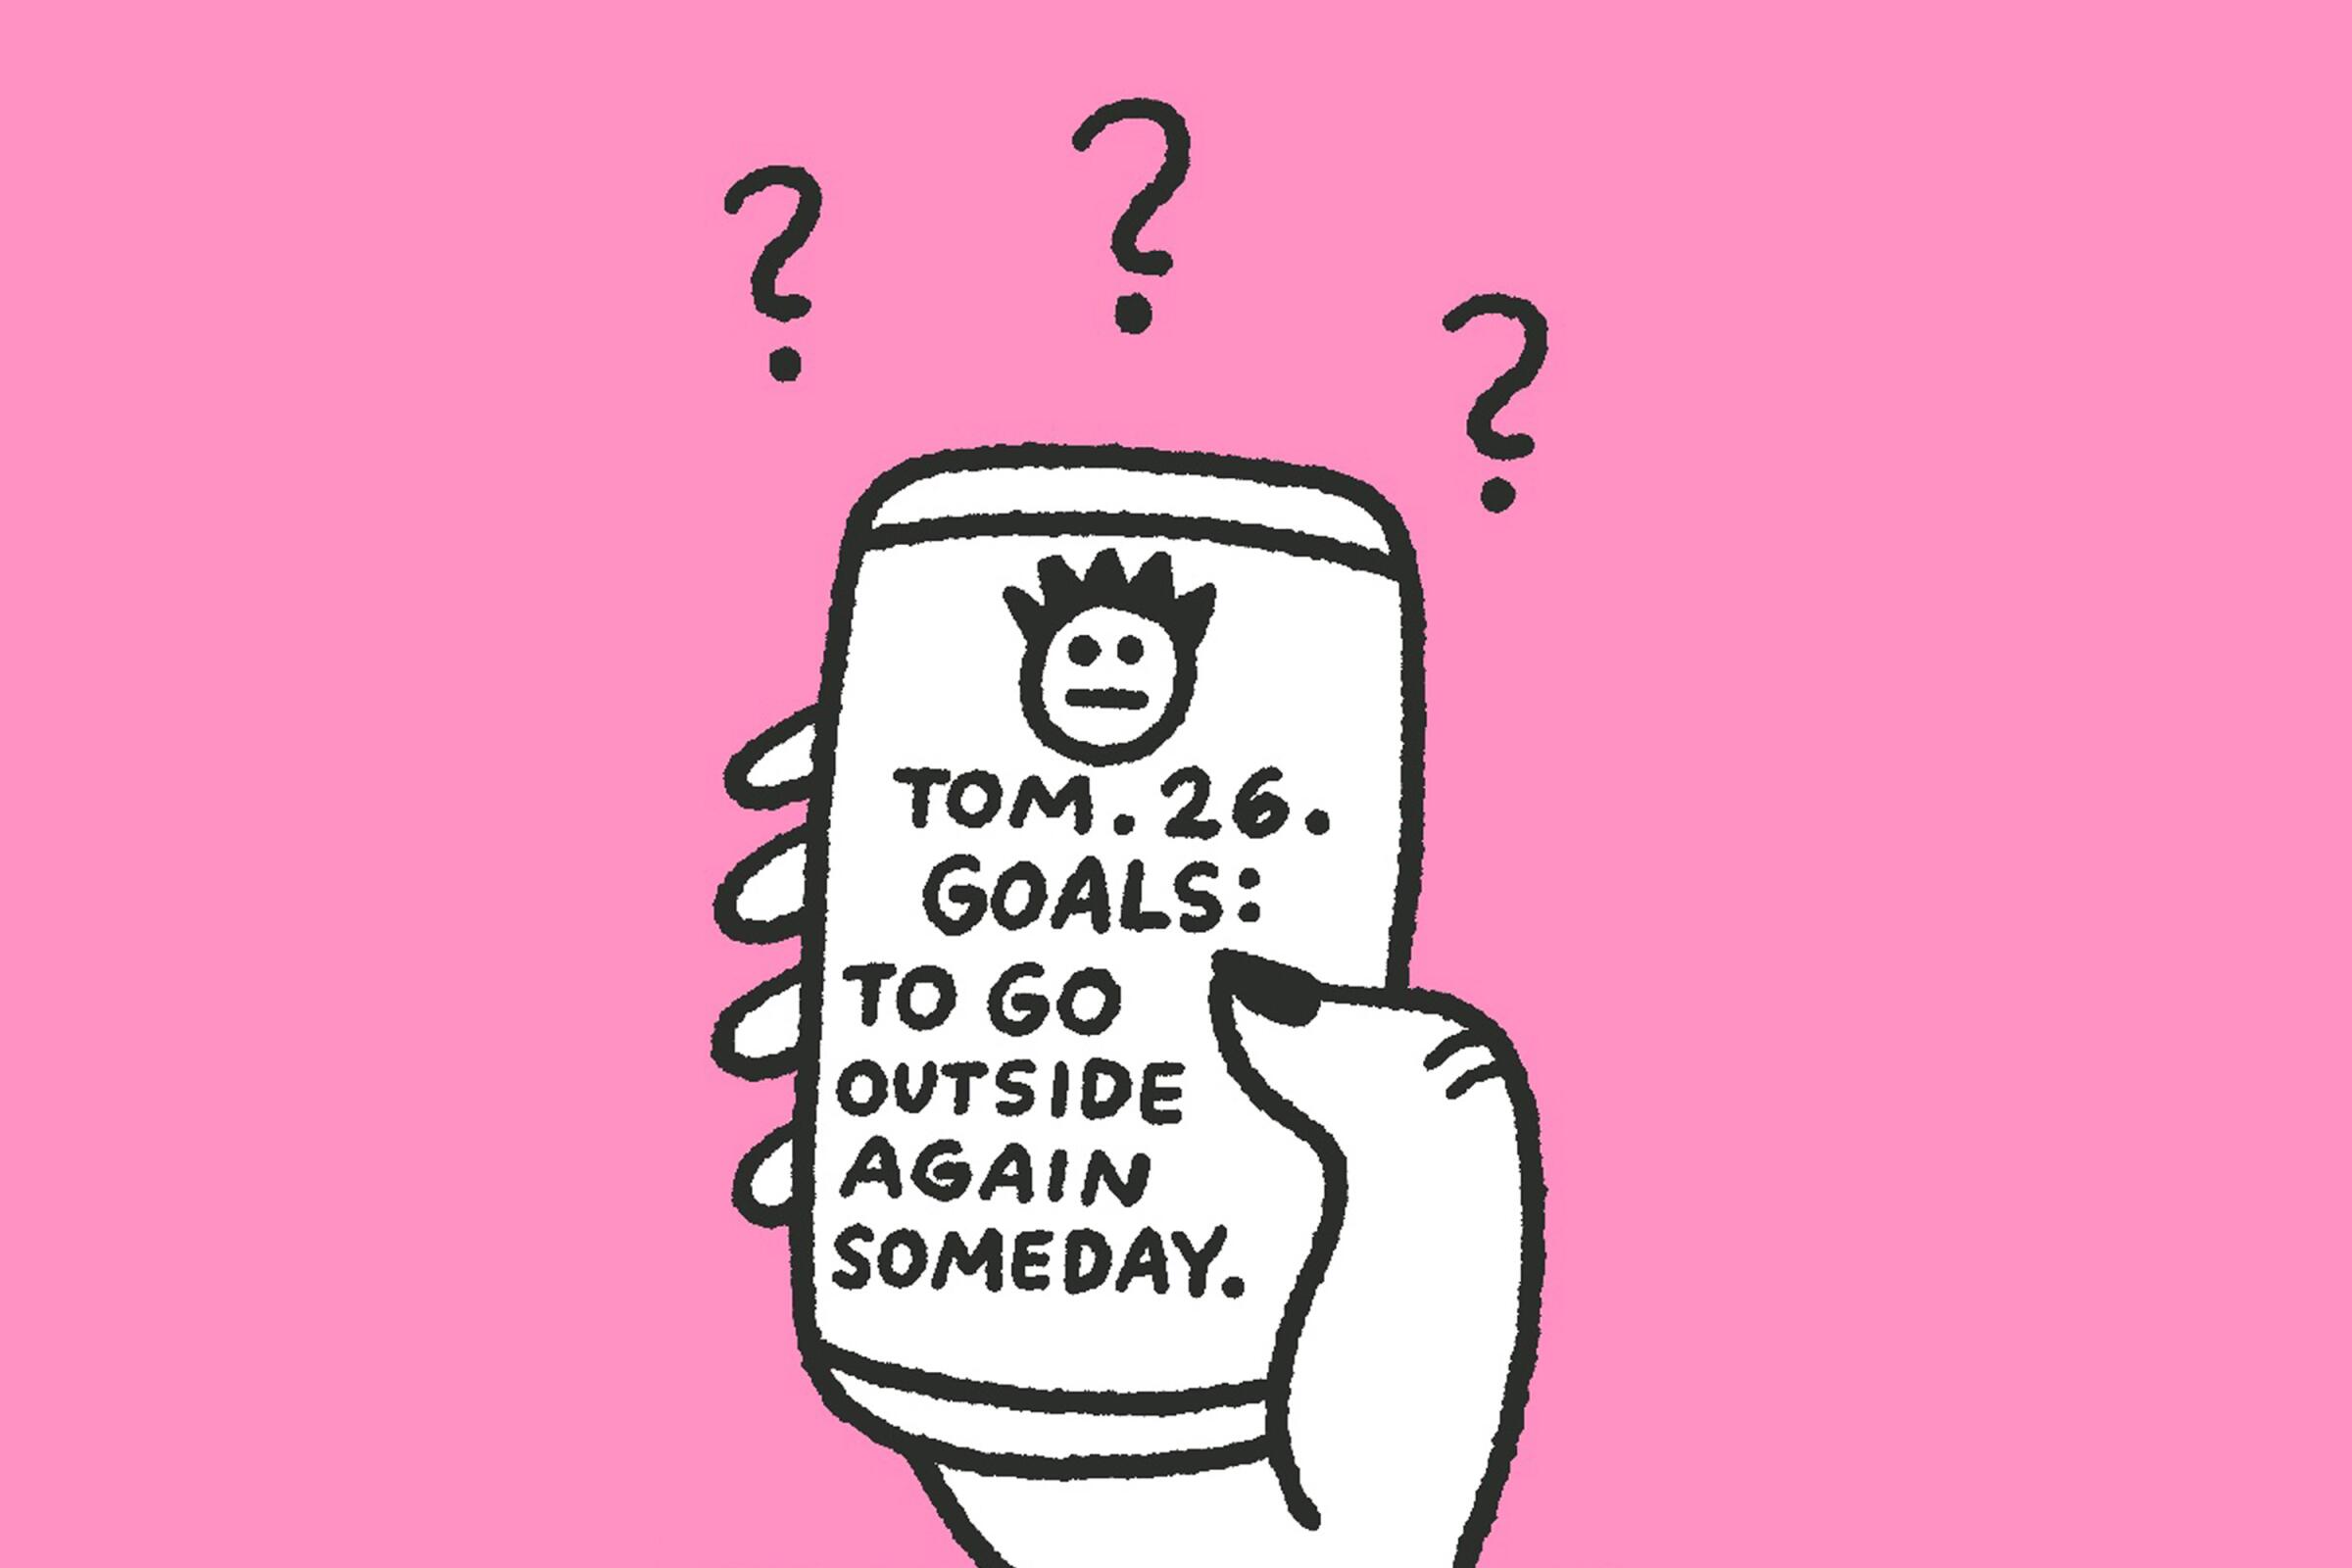 Illustration of a phone that says: Tom. 26. Goals: To go outside again someday.